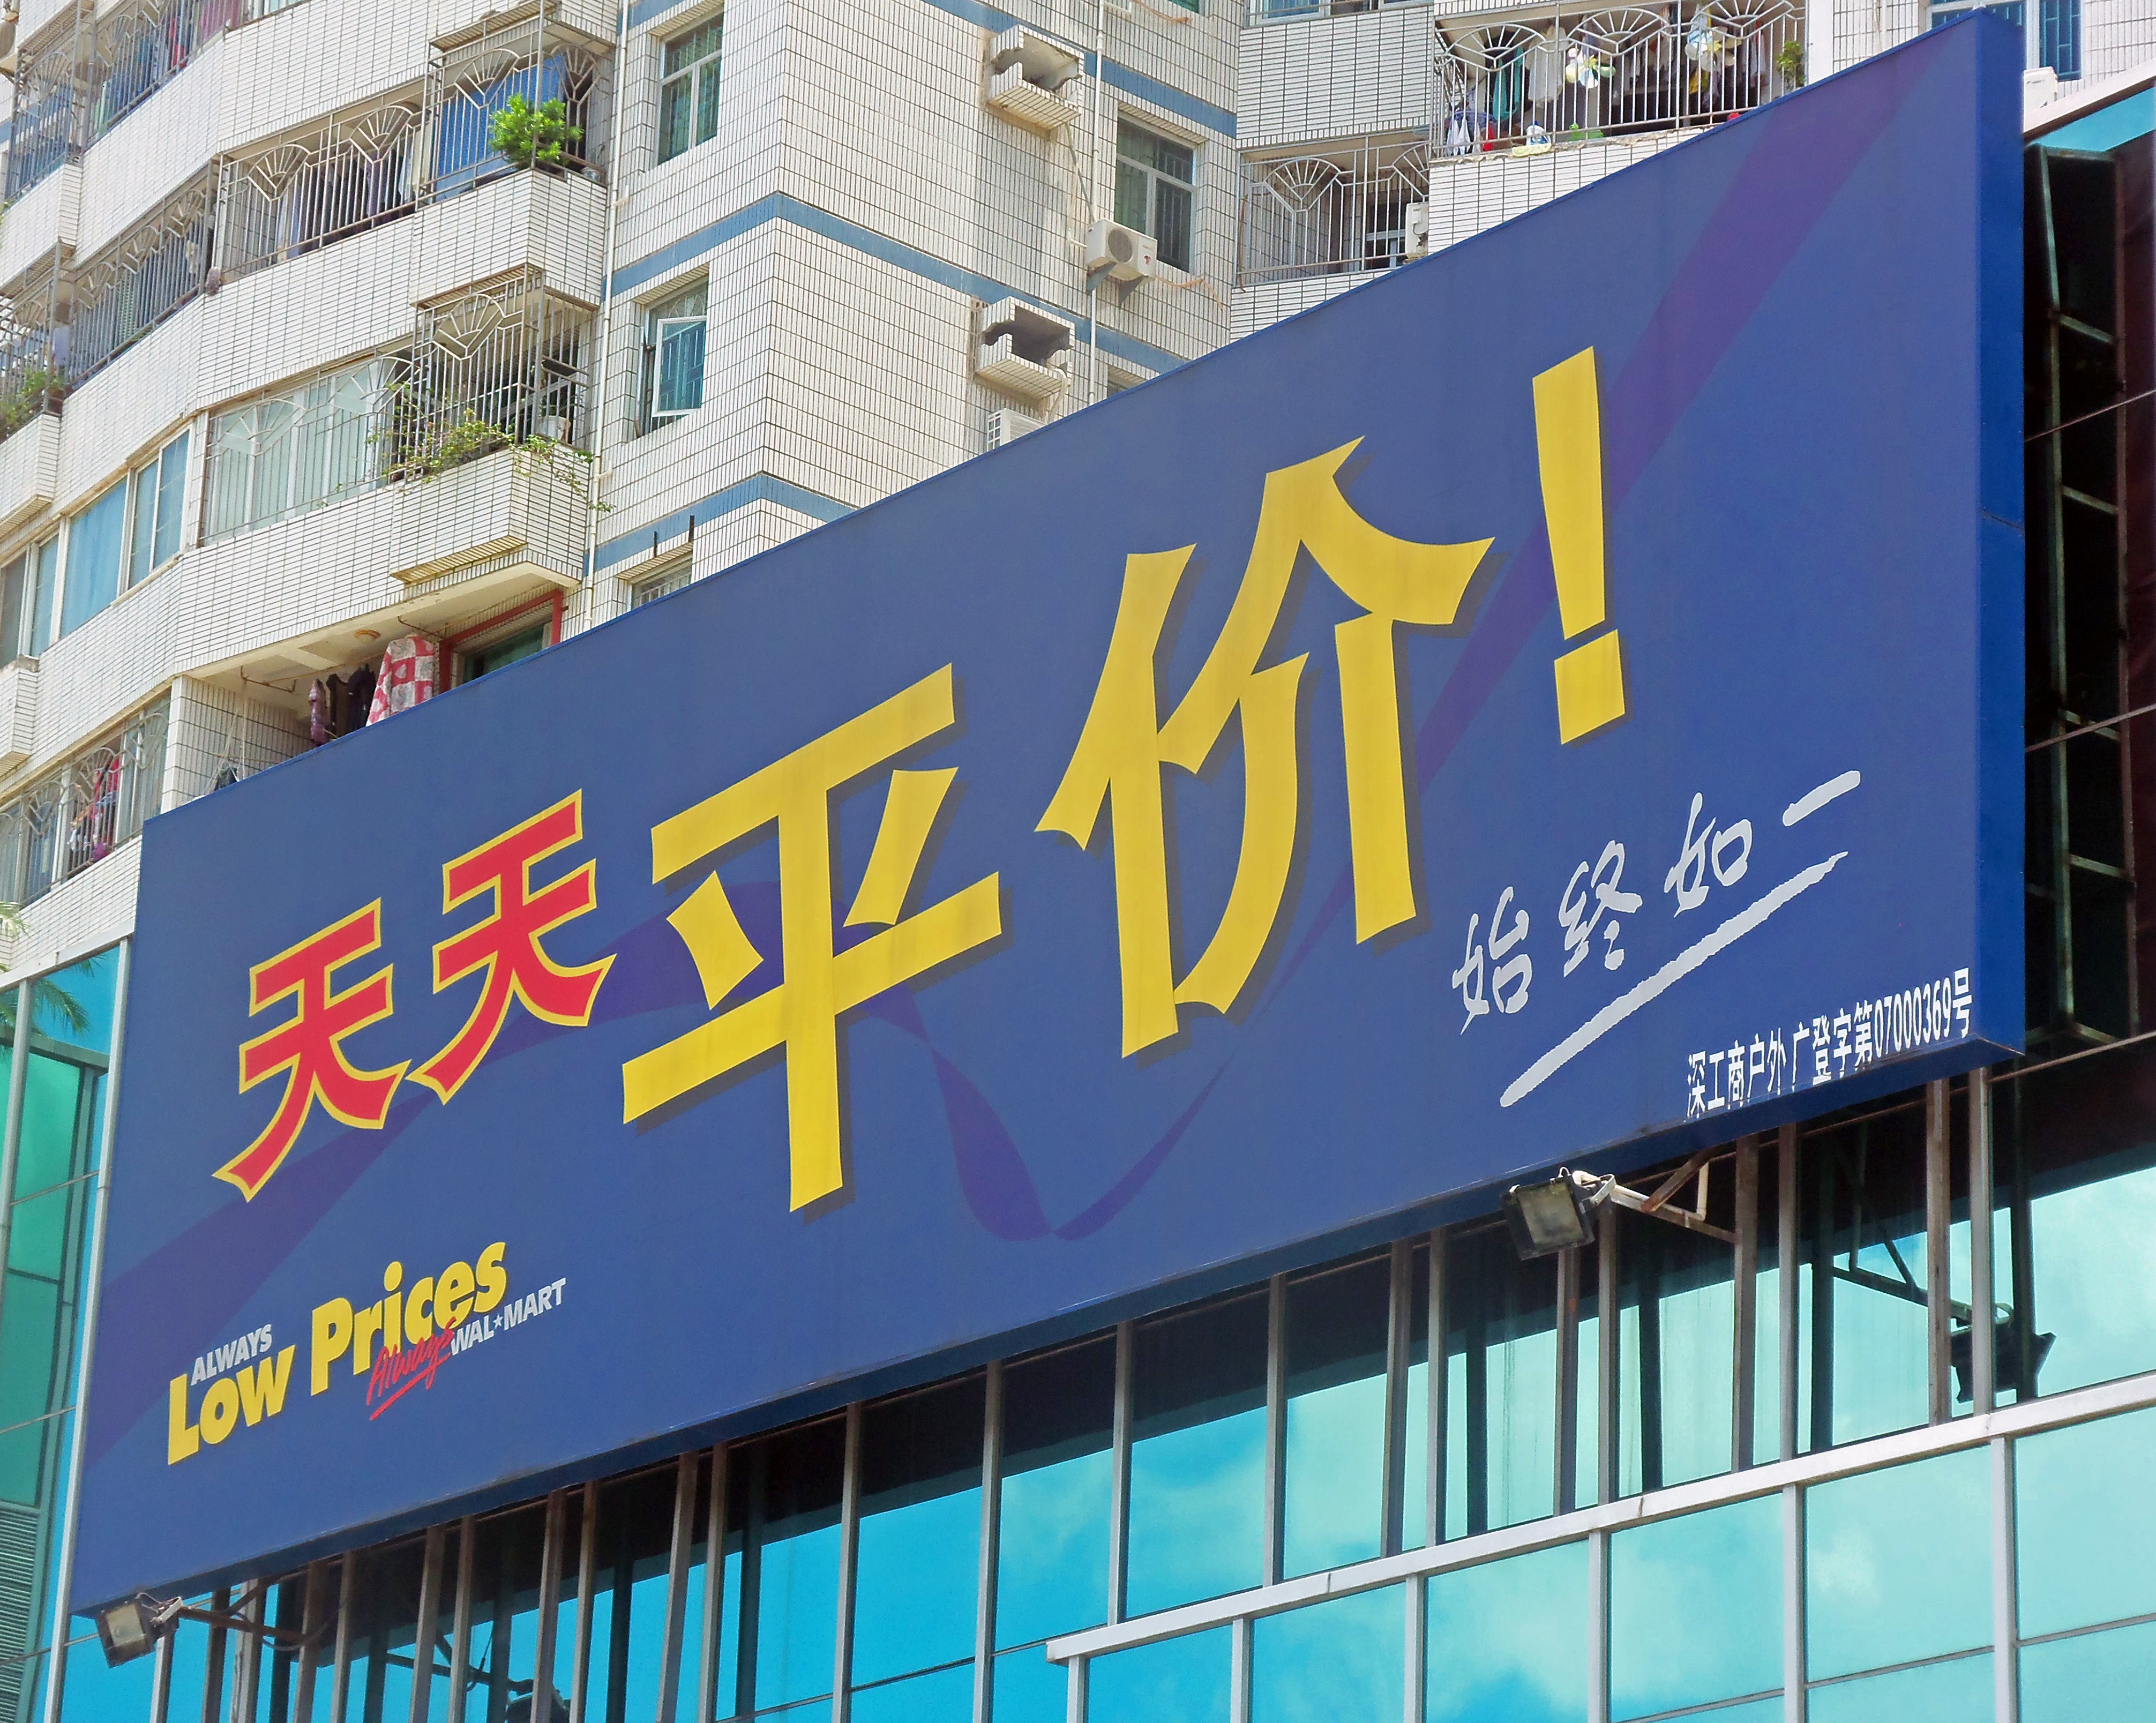 A billboard for Walmart in Sichuan Province, China.